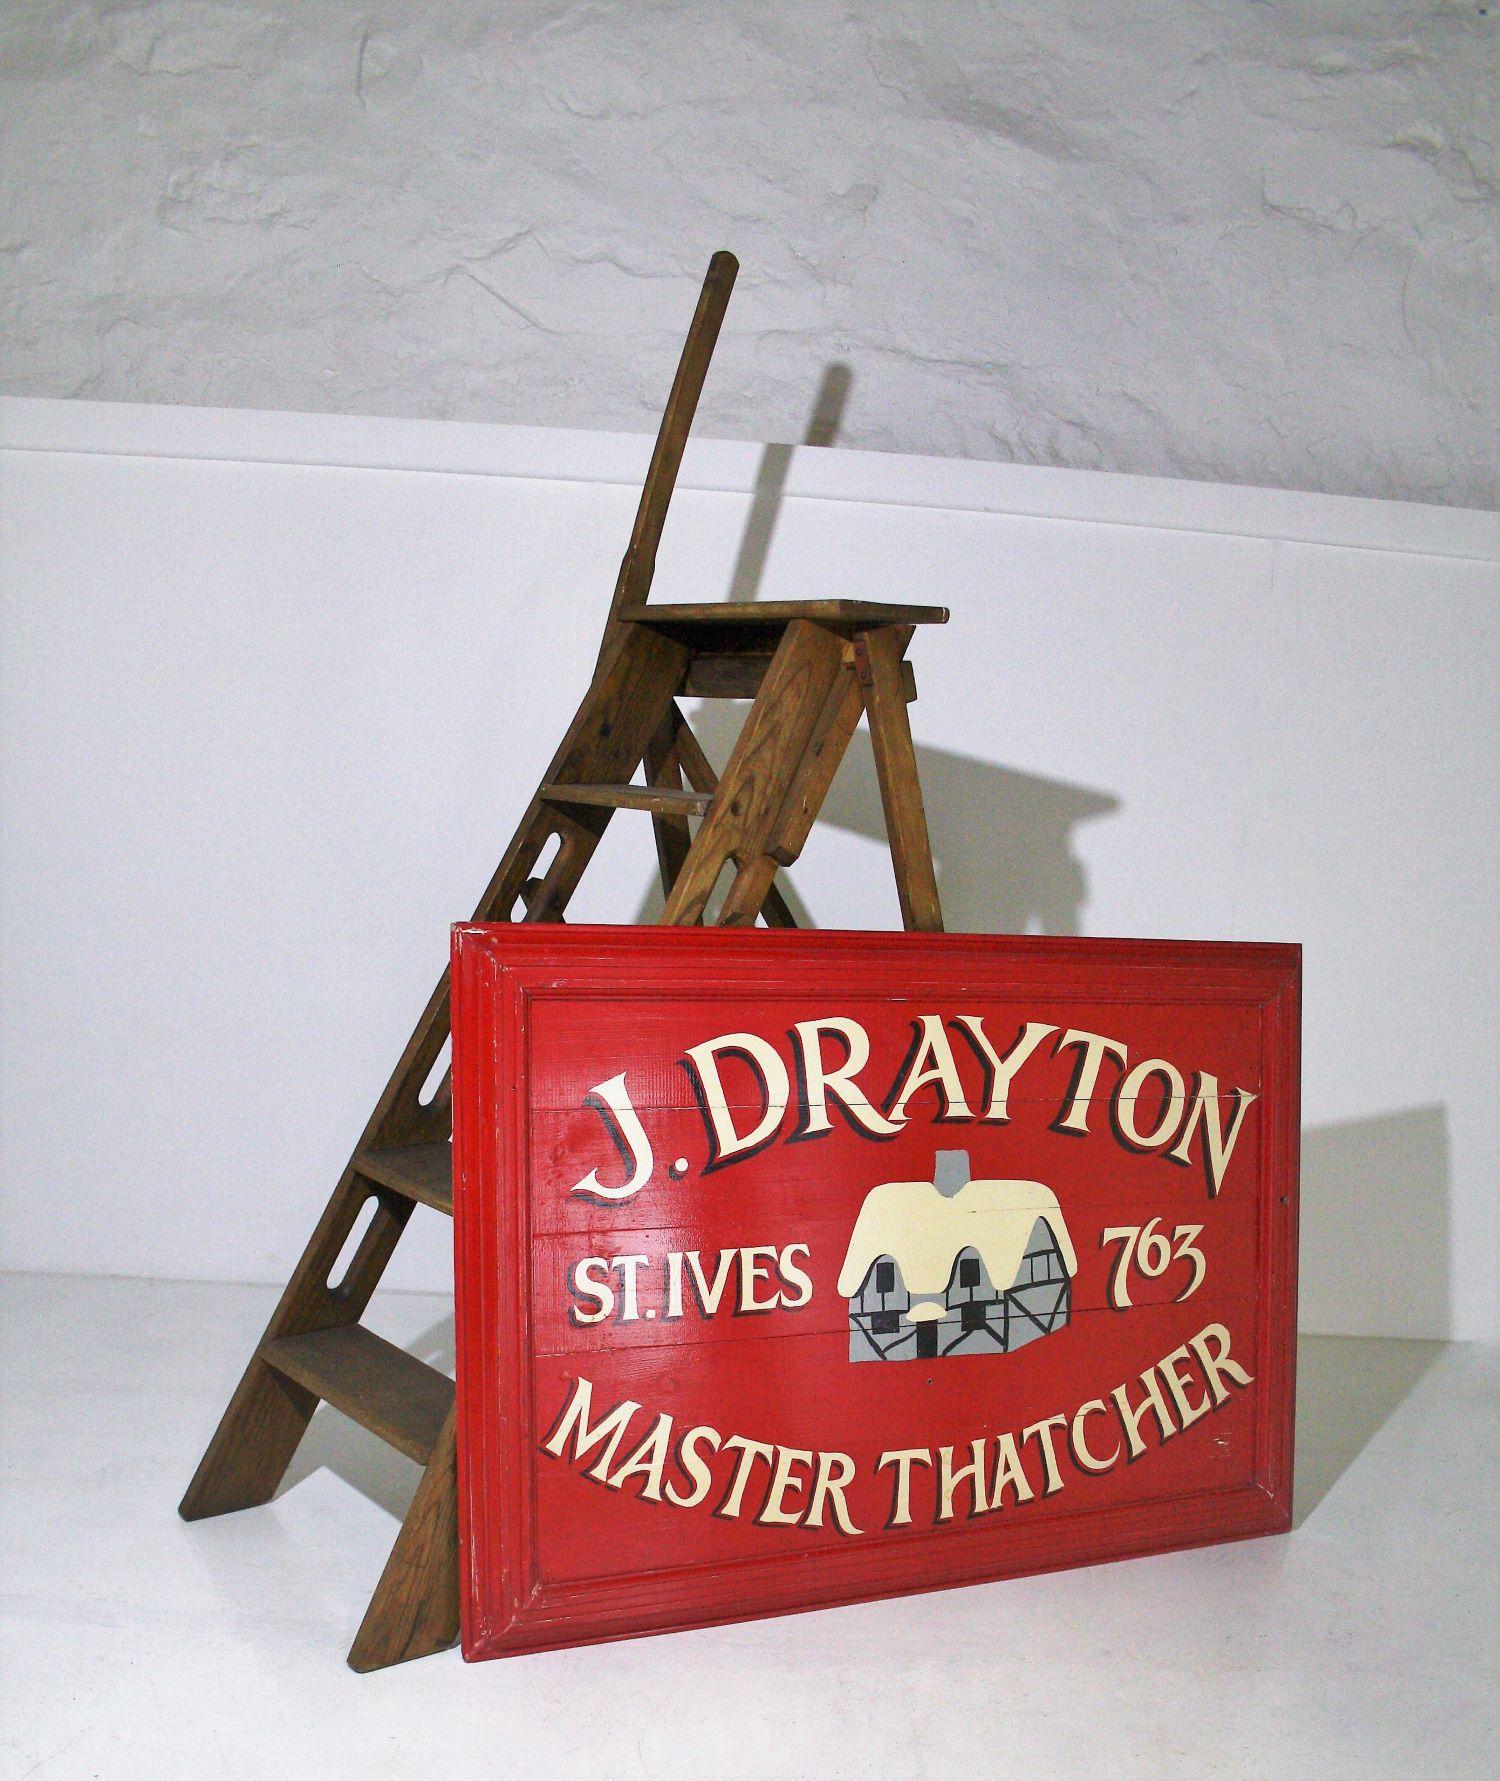 A lovely old hand painted sign J.Drayton Master Thatcher of St. Ives.
Known for its surf beaches and quaint costal villages with thatched cottages, this piece is a reminder of simpler way of life before the age of mobile phones and social